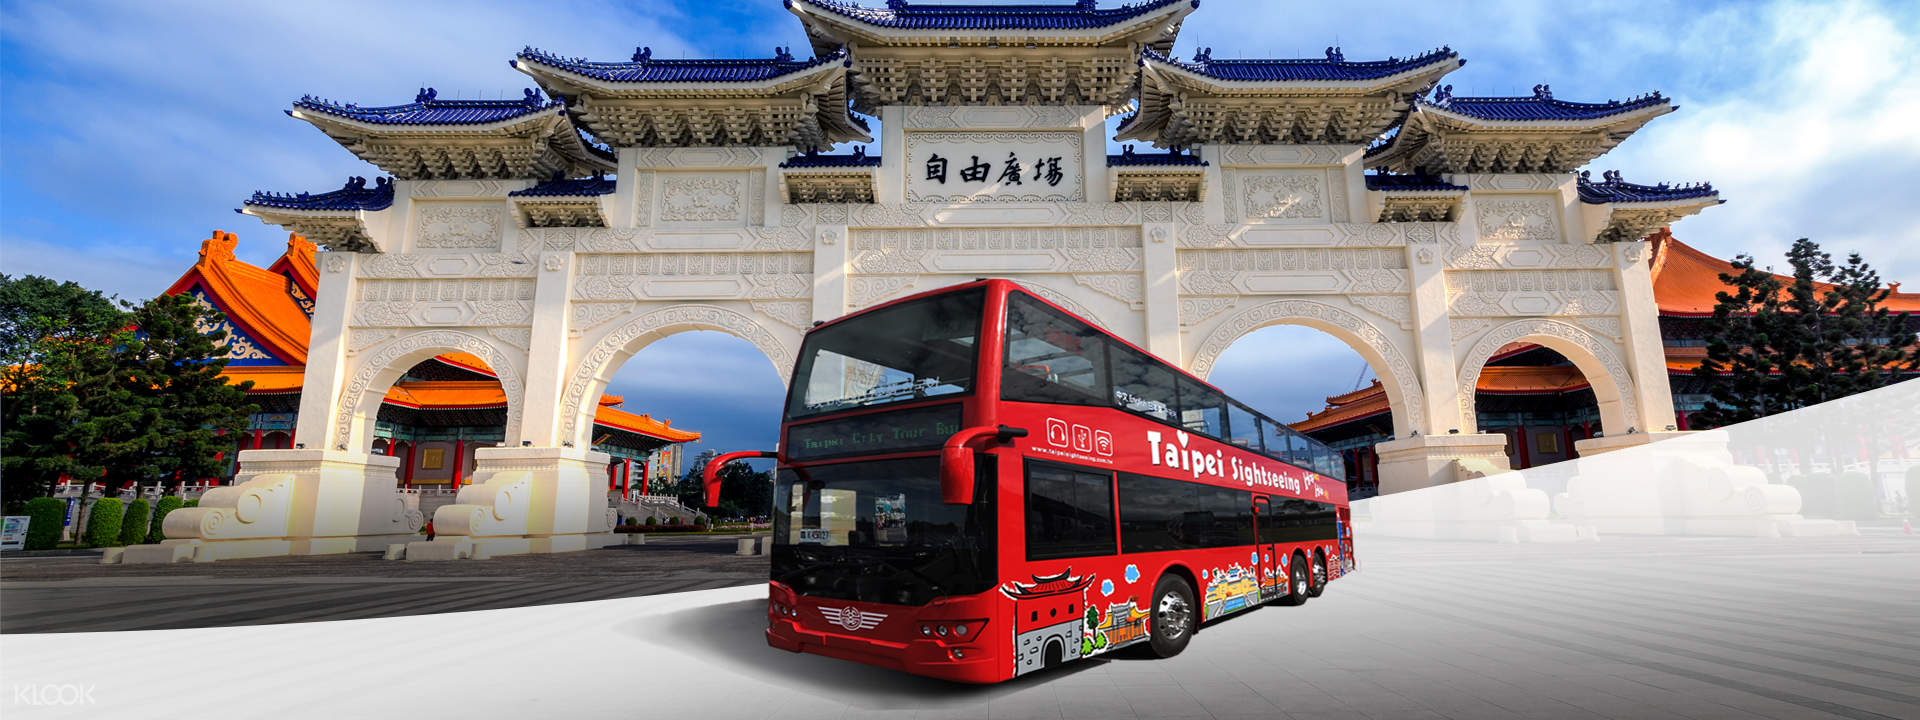 Double decker hop-on-hop-off sightseeing tour, Taiwan